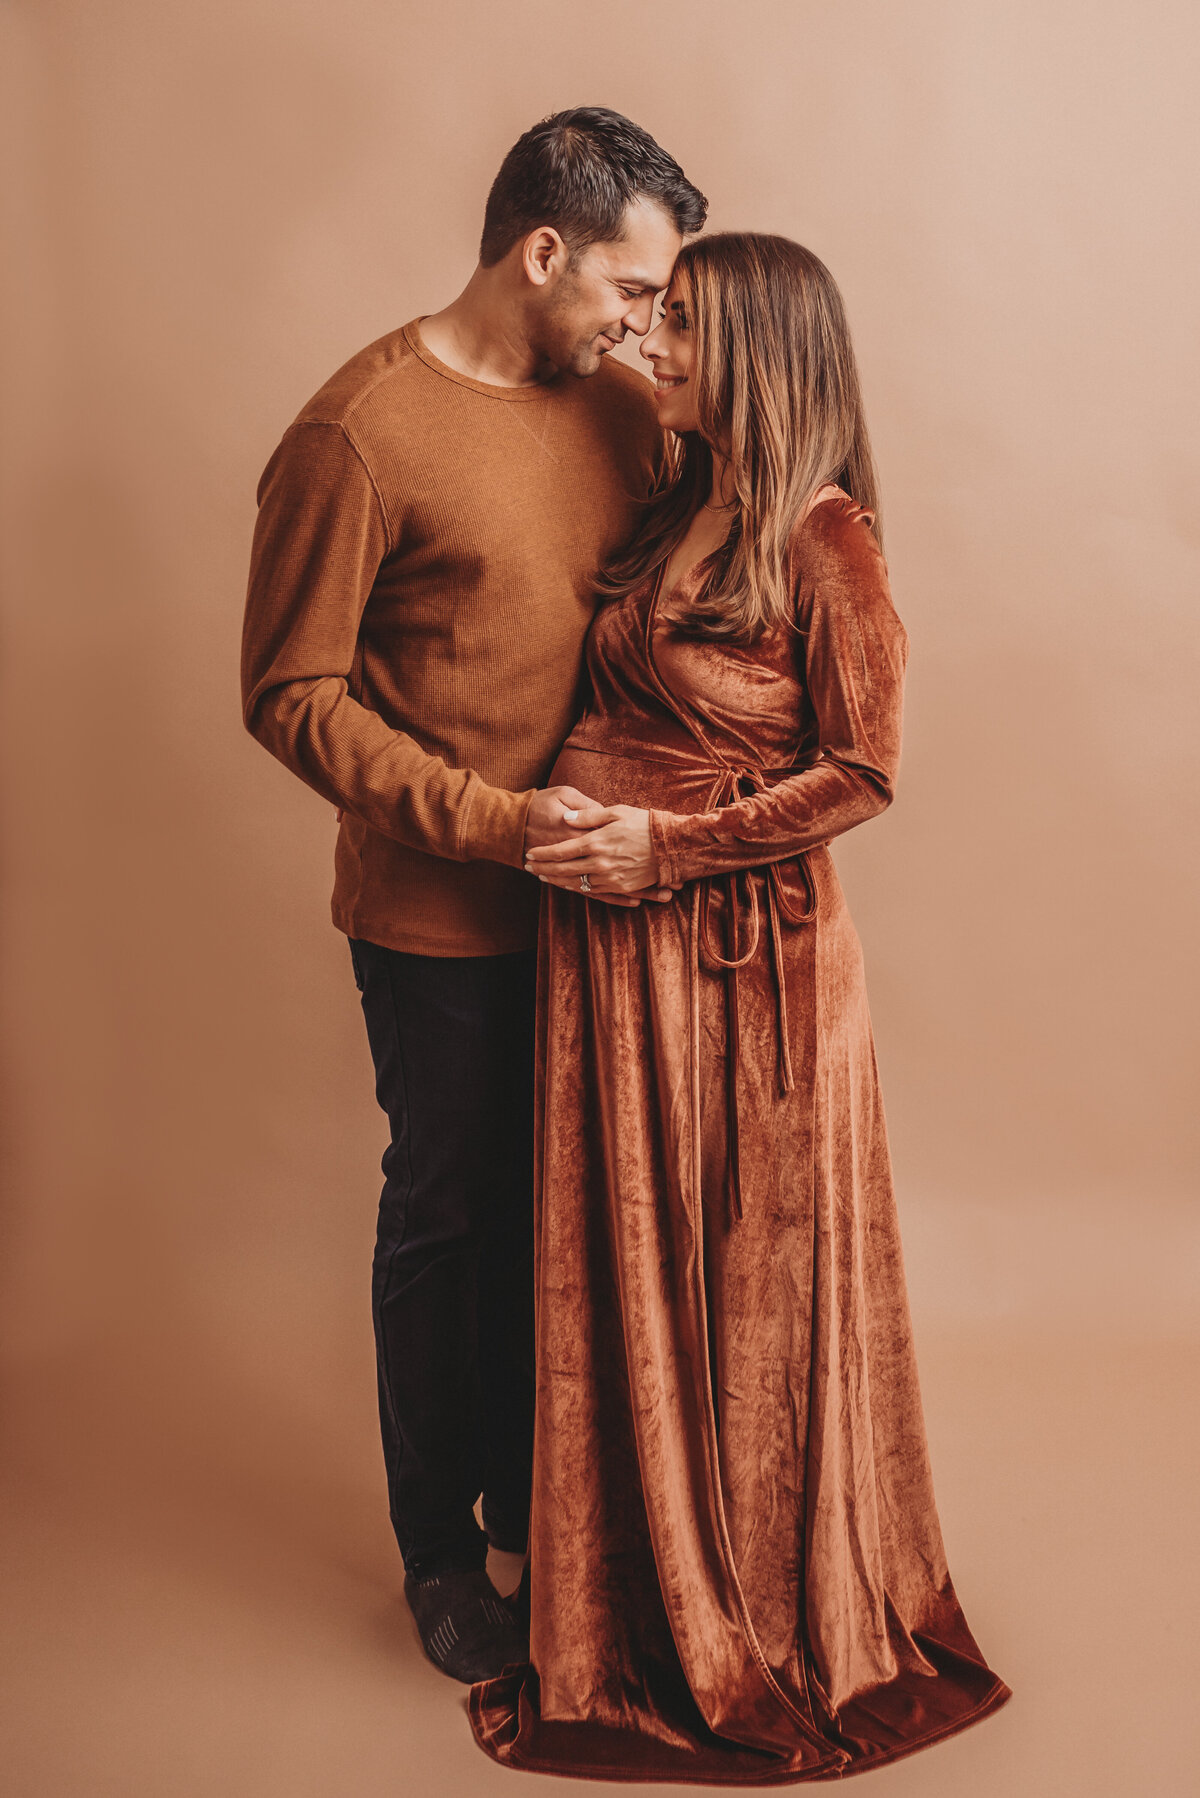 Couple at maternity photo shoot woman is wearing copper color floor length wrap dress and man is wearing brown long sleeve shirt with black slacks